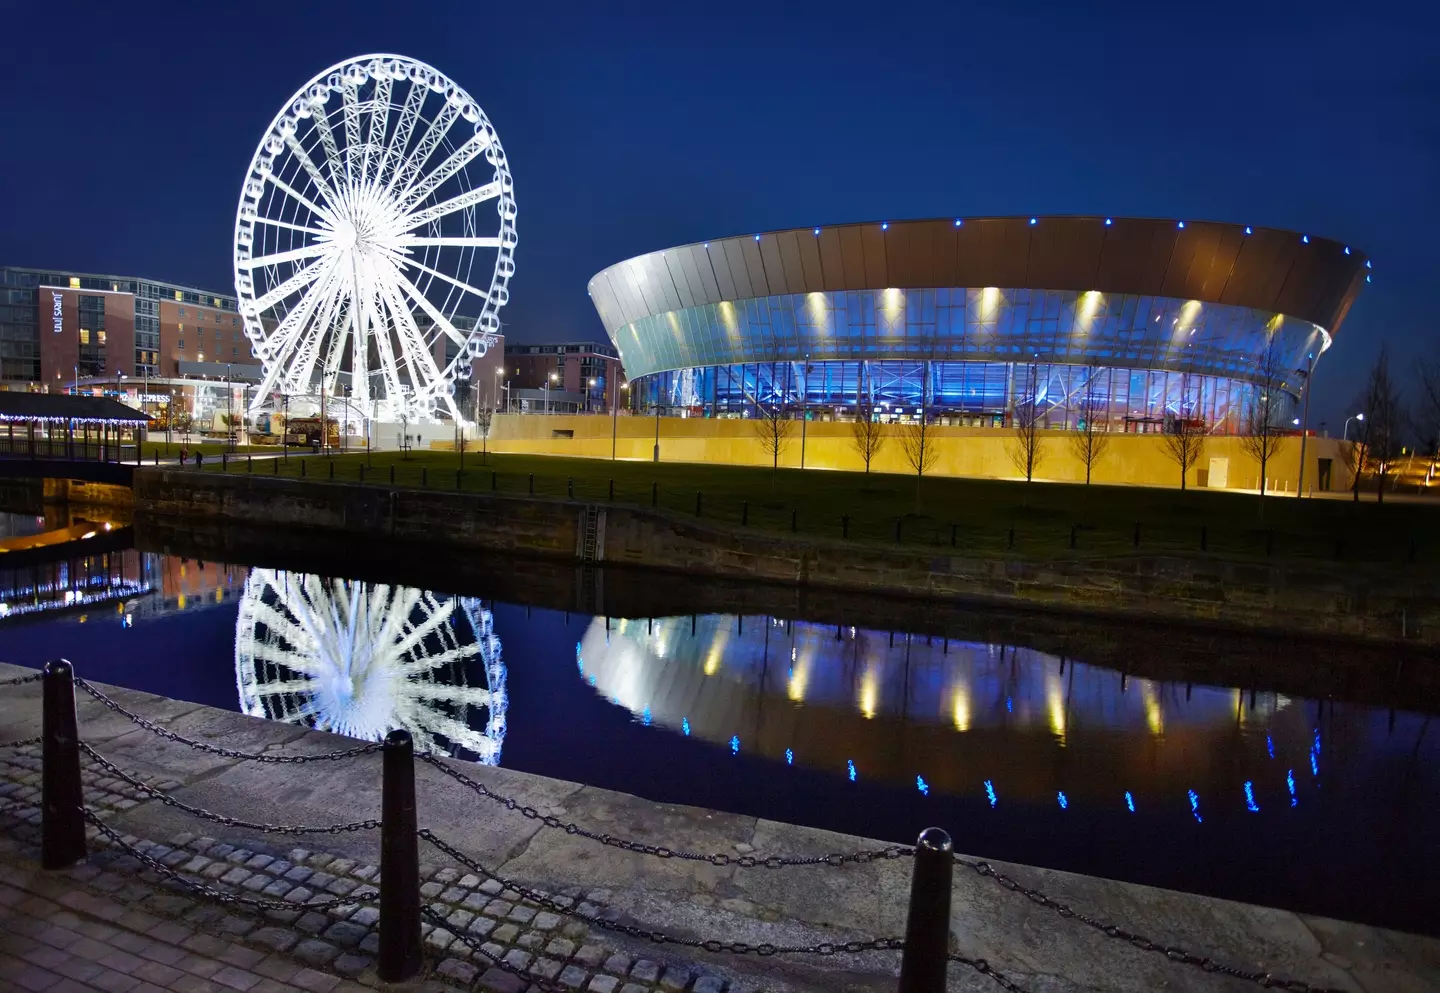 The 67th Eurovision Song Contest will take place at Liverpool's Echo Arena.